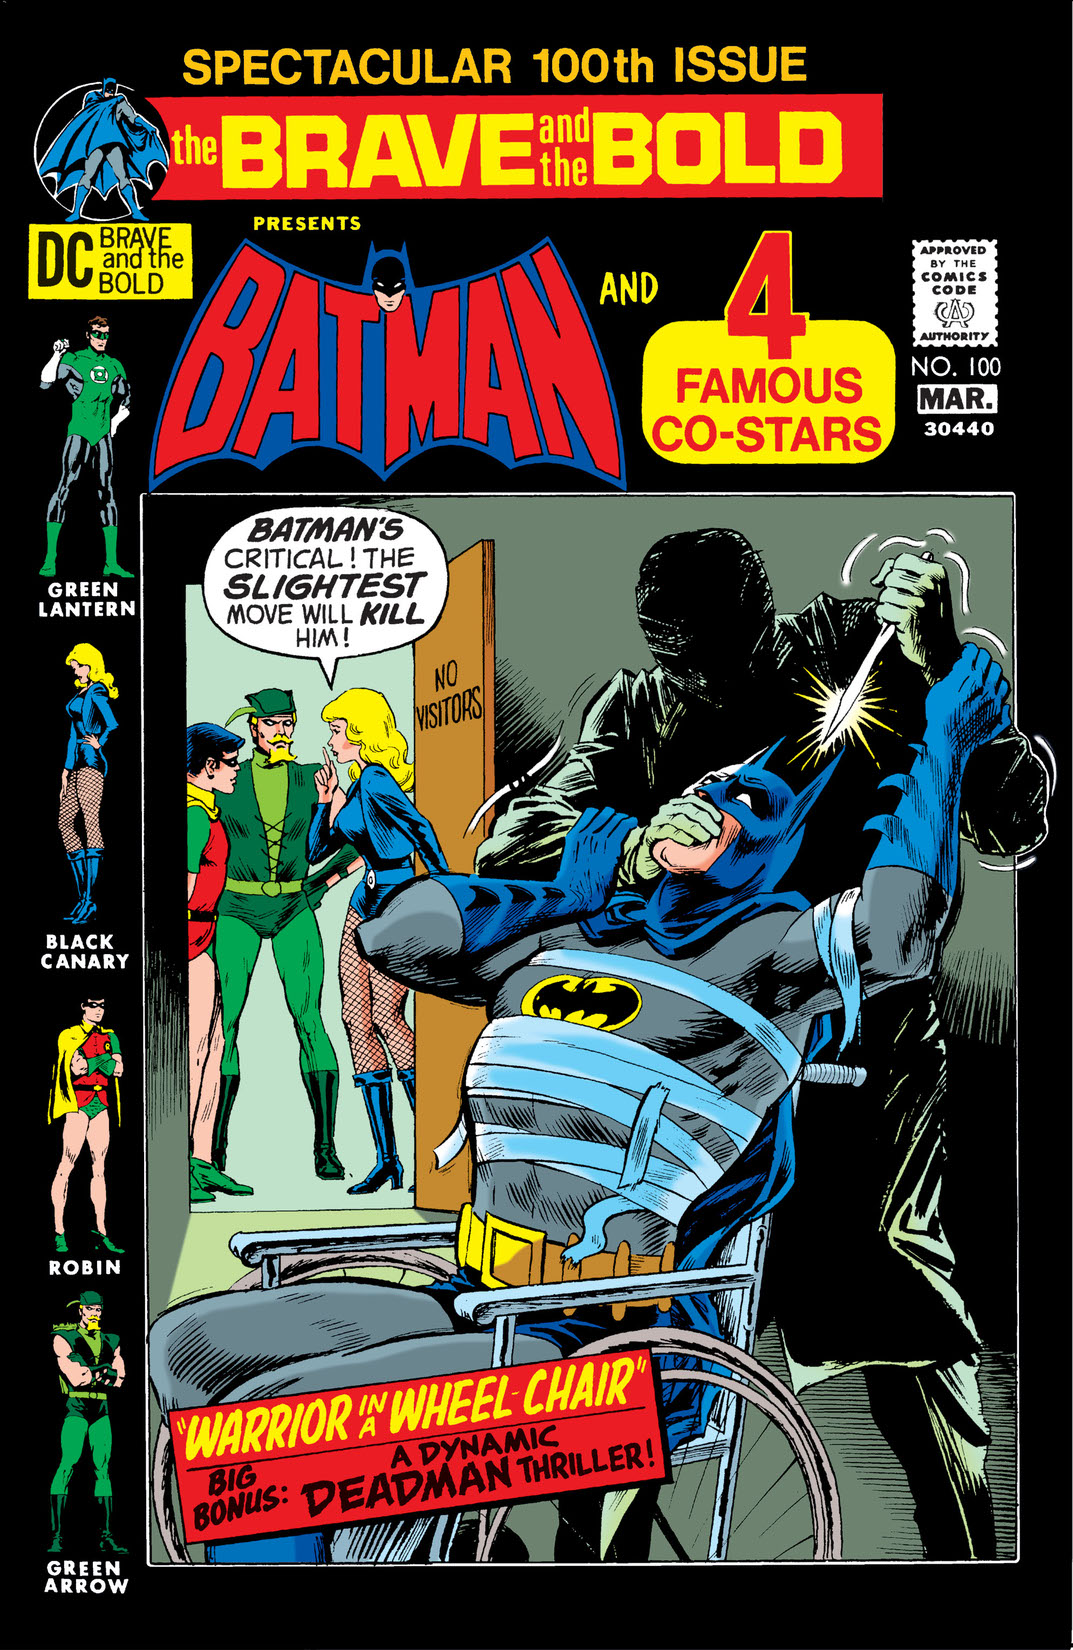 The Brave and the Bold (1955-) #100 preview images